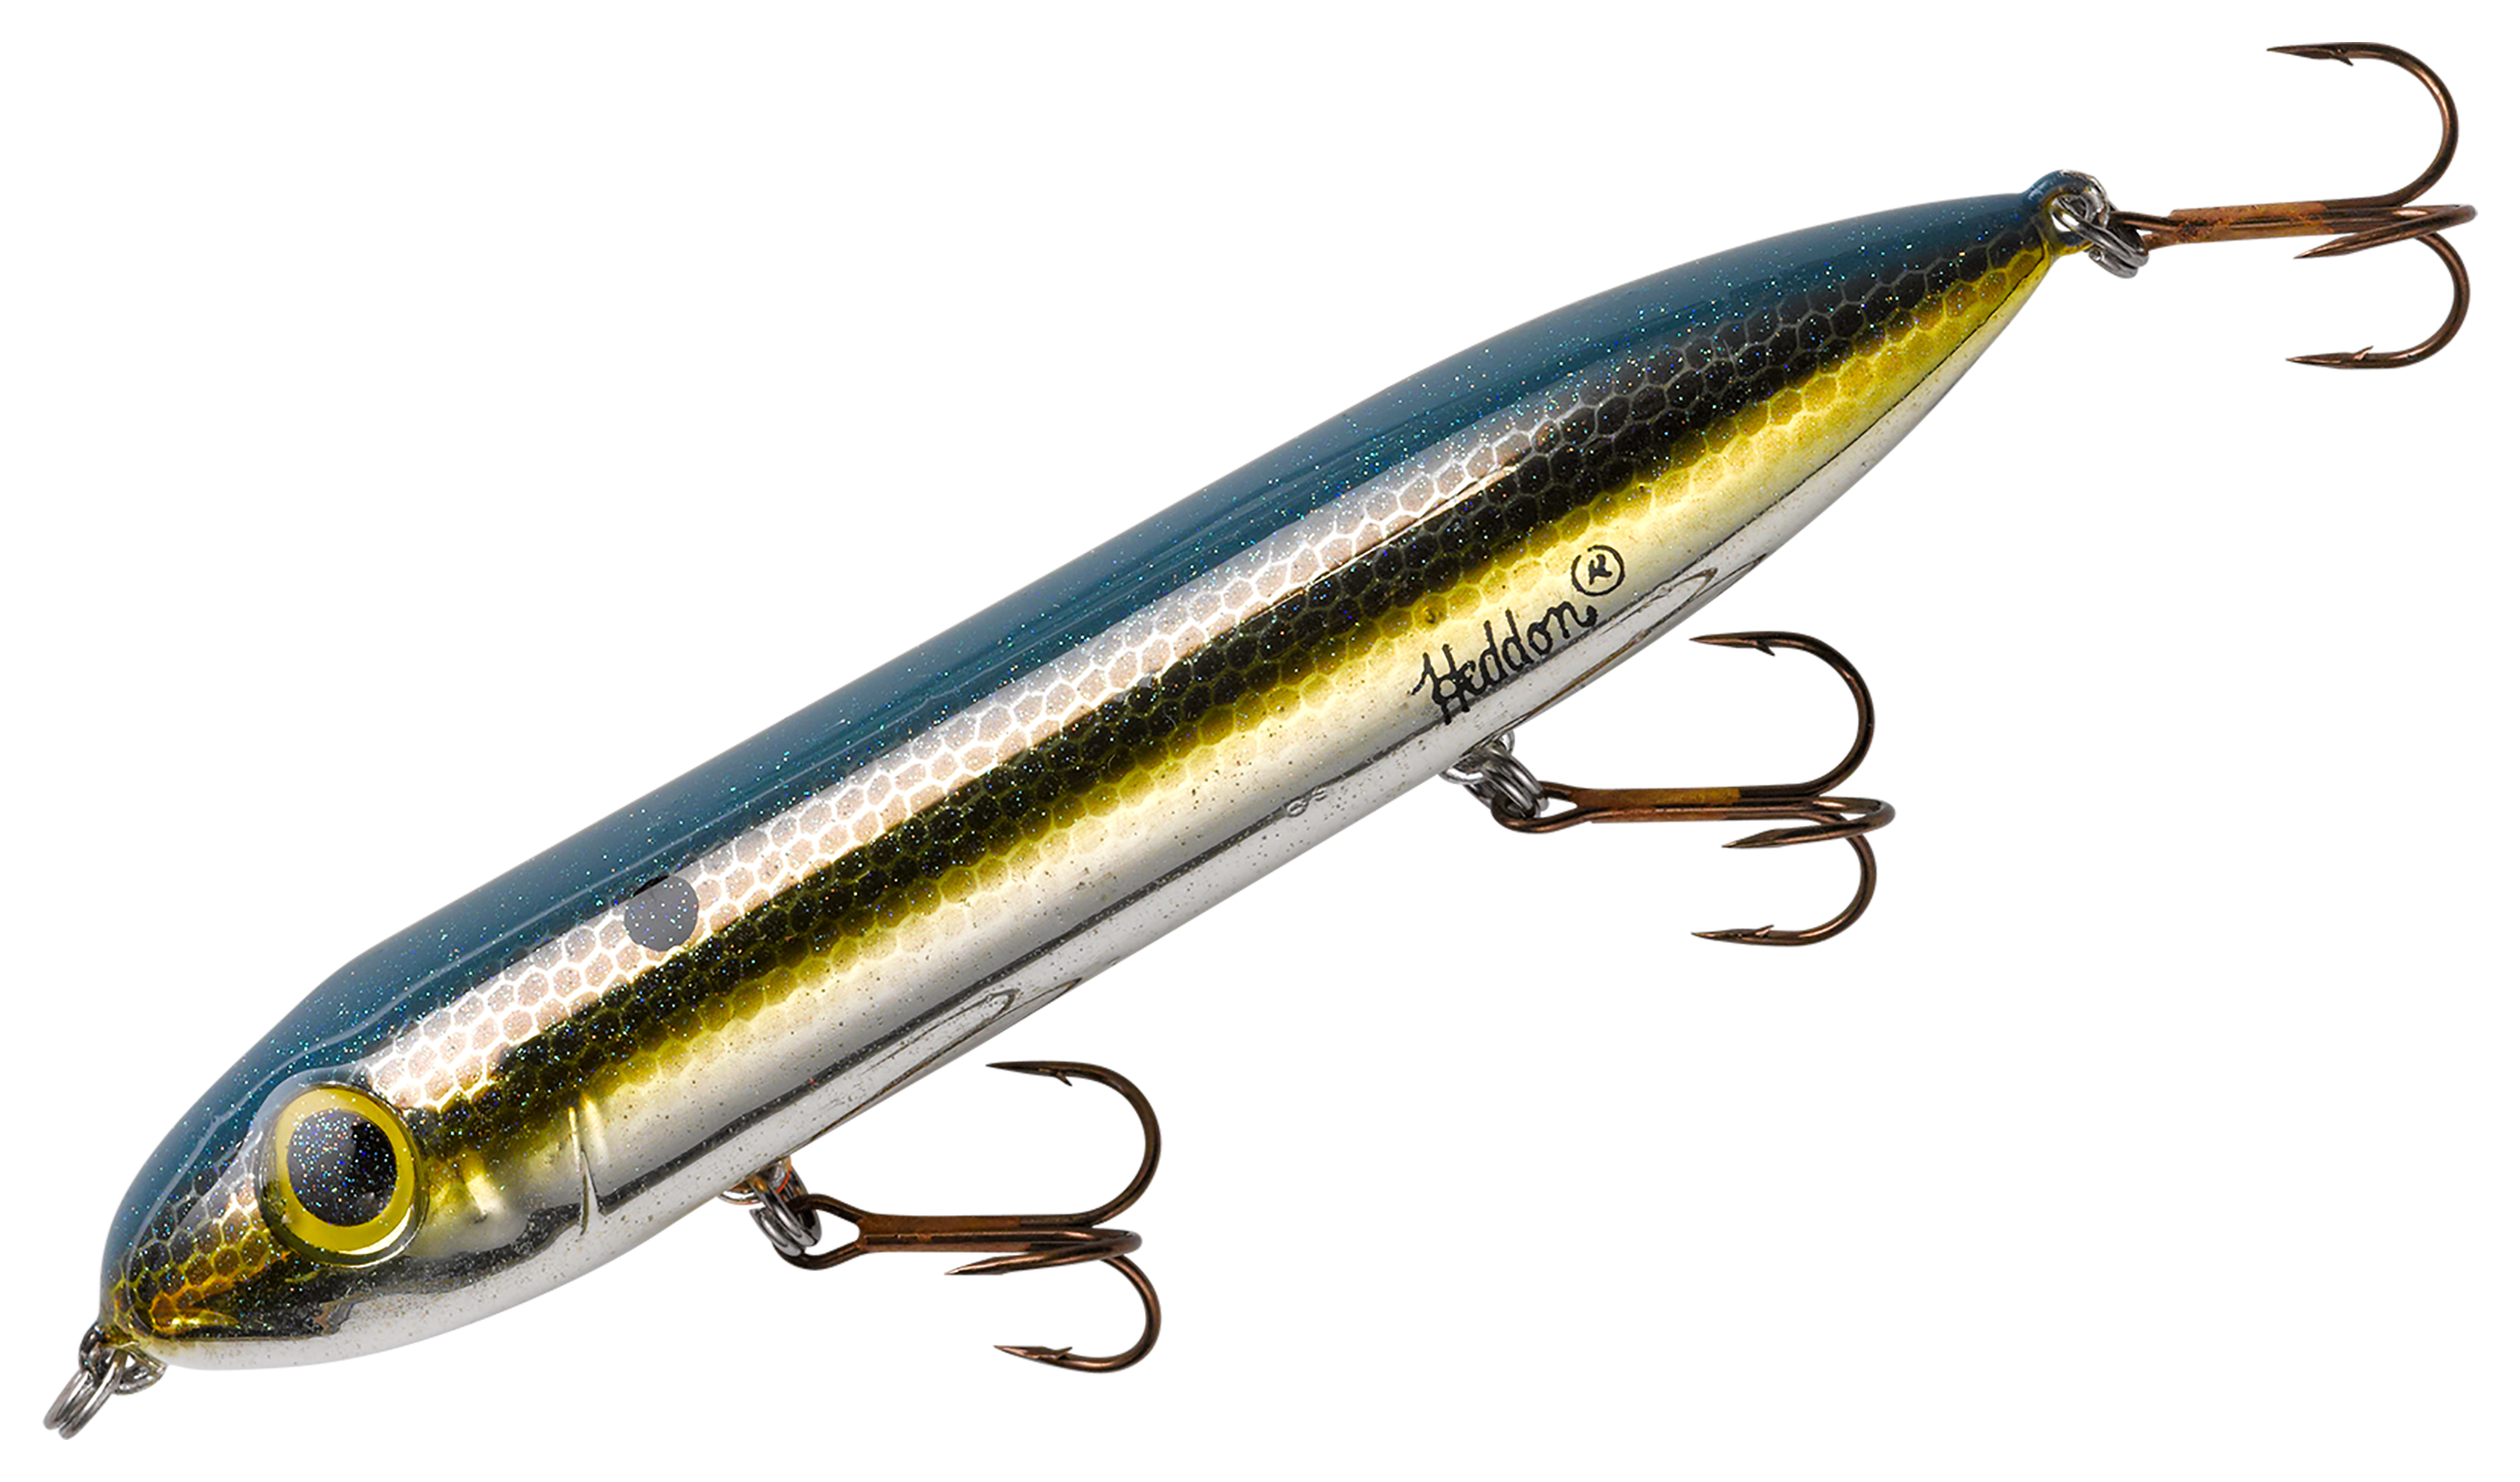 Heddon Wounded Shad Super Spook Jr. Lure - Shop Fishing at H-E-B